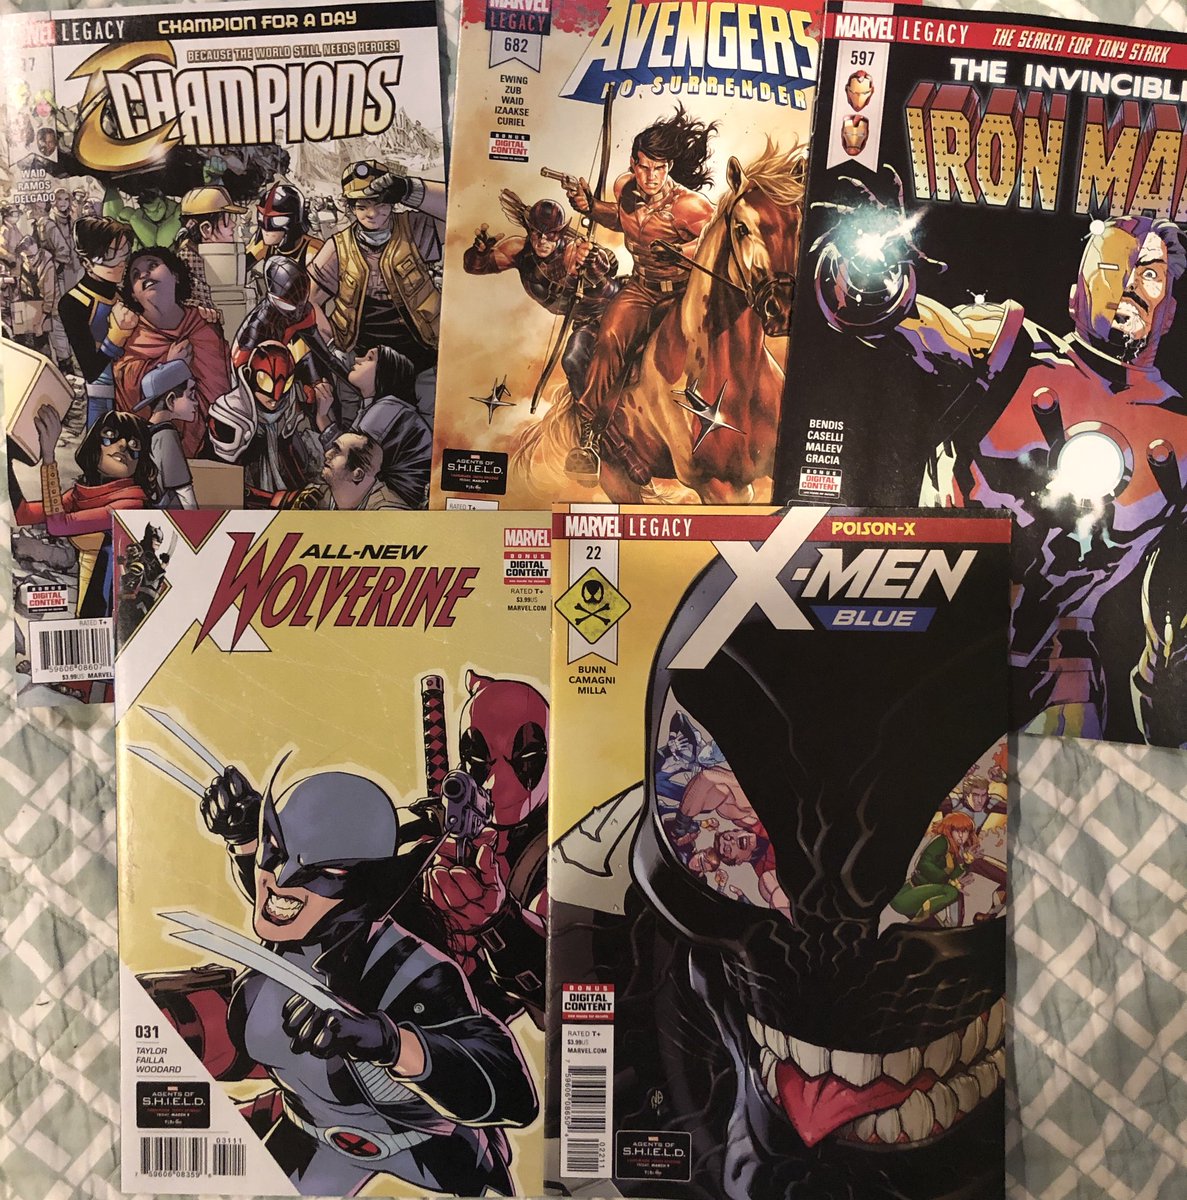 Apparently it’s an all marvel day over here at chez me. What are the rest of you reading, though?

#XMenBlue #PoisonX #AllNewWolverine #TheInvincibleIronMan #Avengers #NoSurrender #Champions #Marvel #NCBD